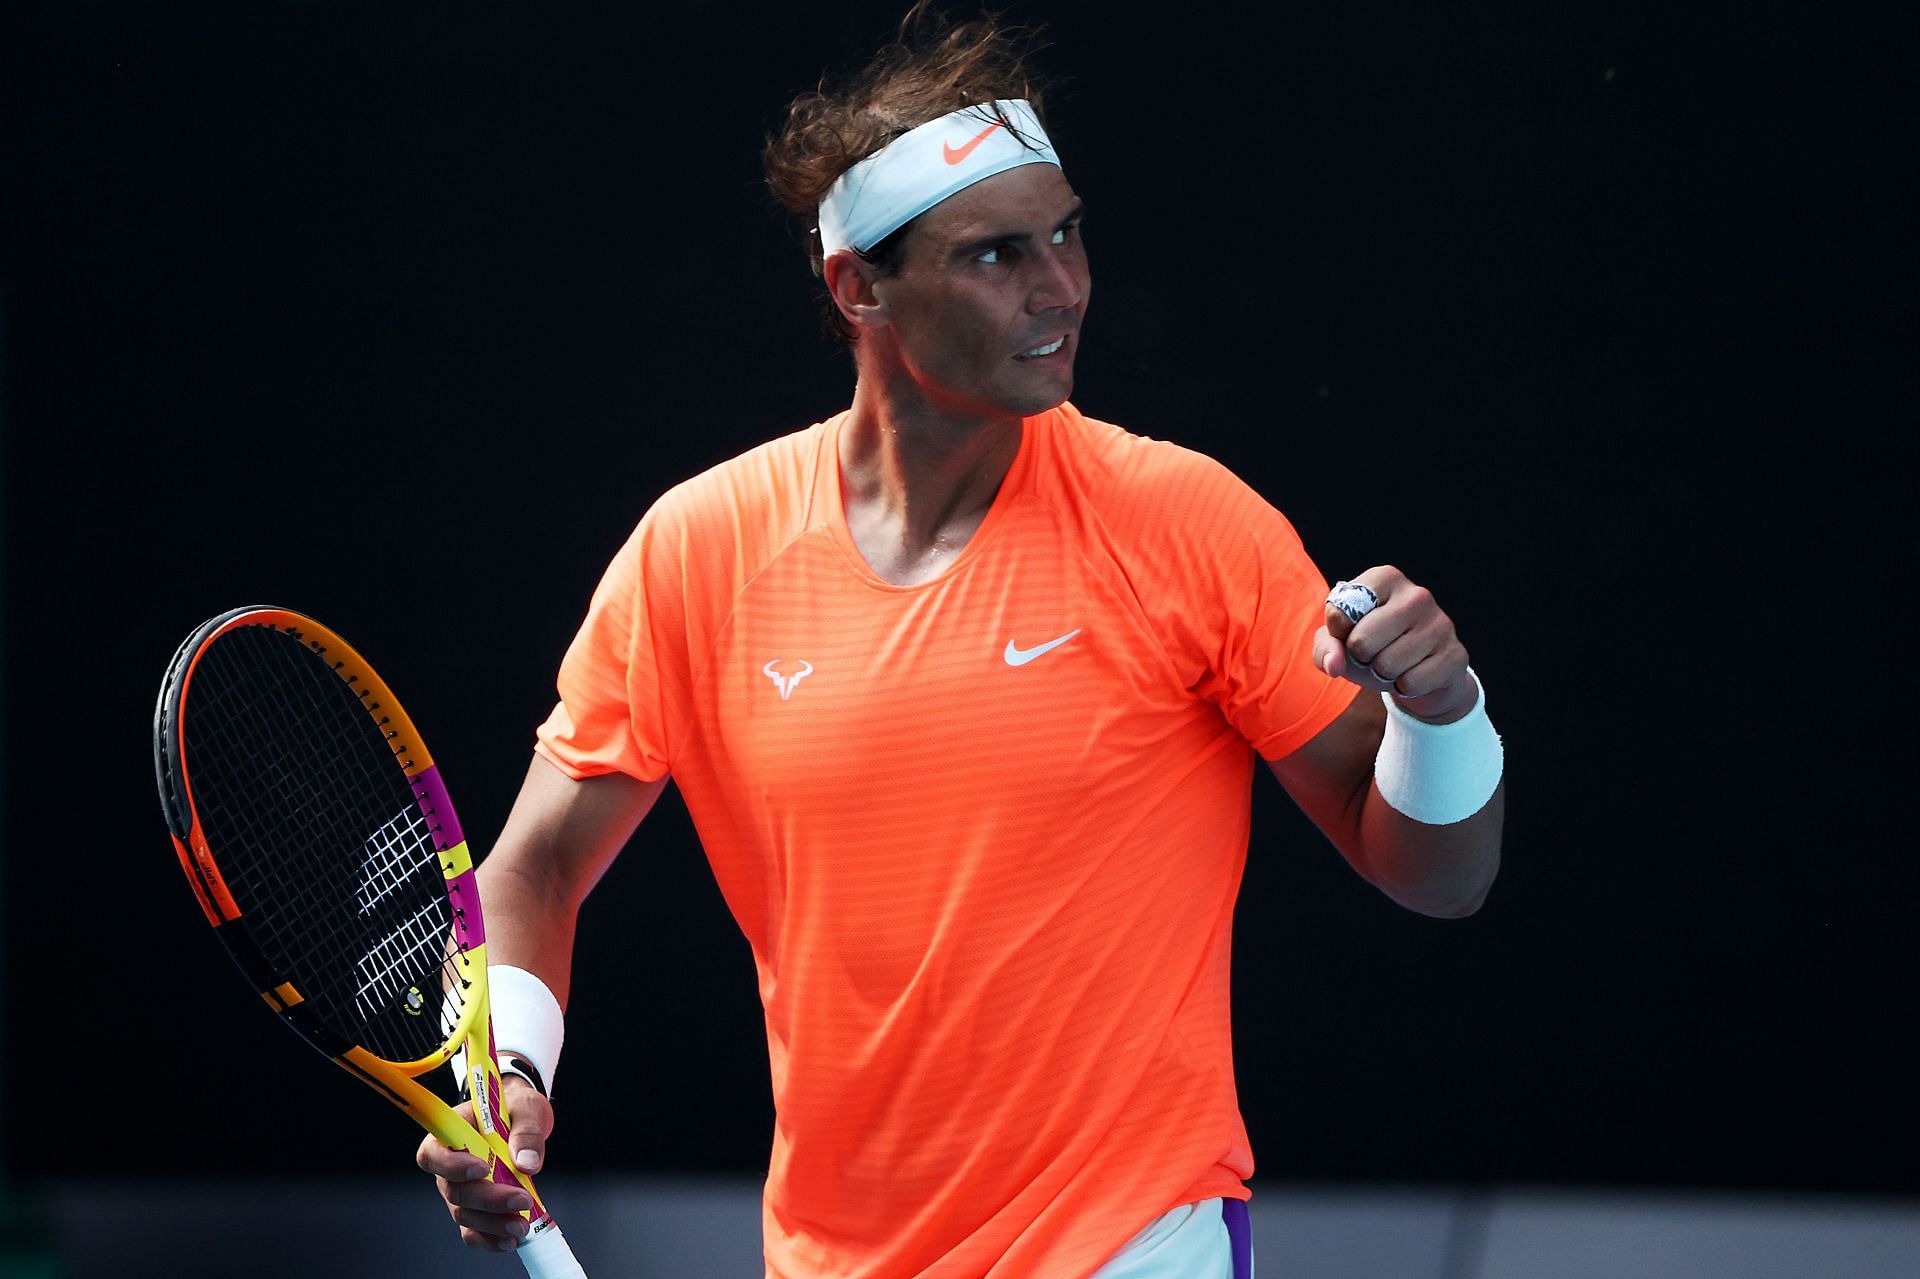 Will Rafael Nadal be able to reach the second week in Melbourne?